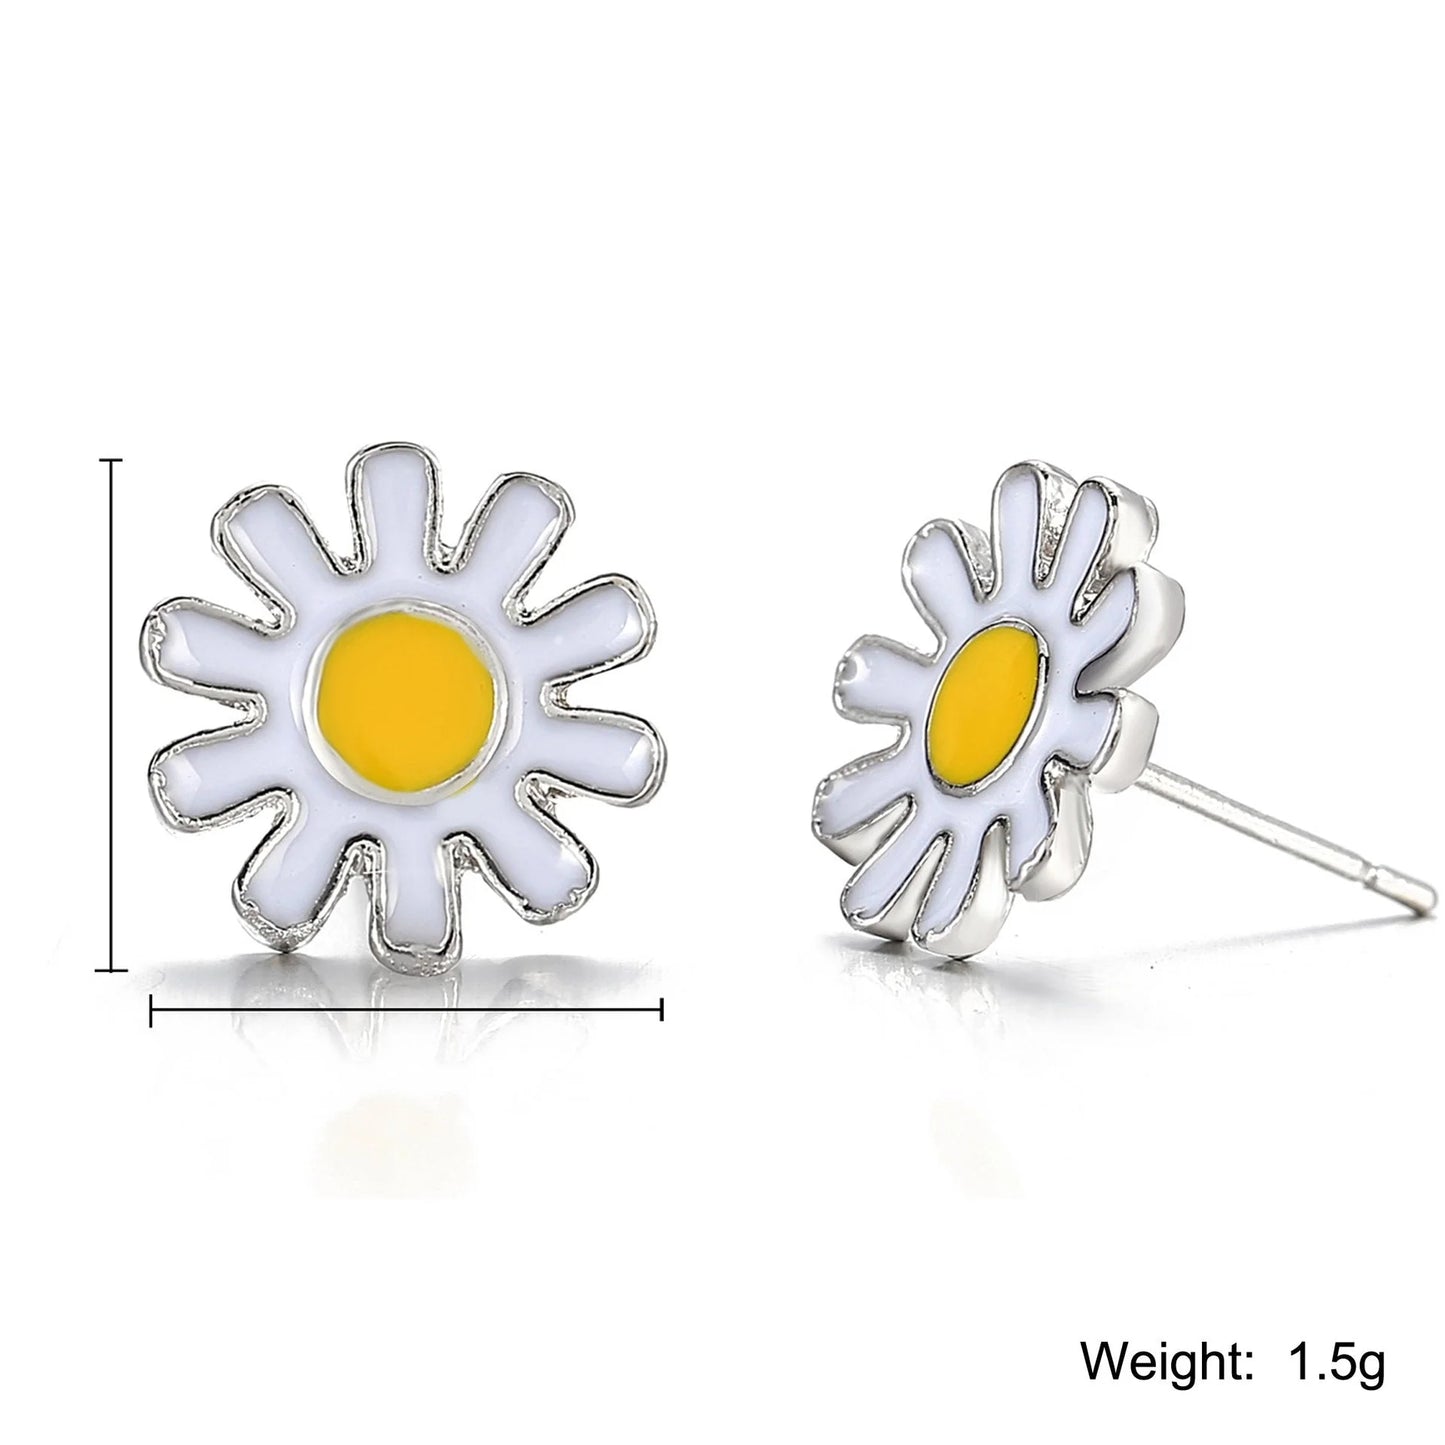 "Exquisite 3-Piece Daisy Flower Jewelry Set - Elegant 18K White Gold Plated Set with Stunning ITALY Design"